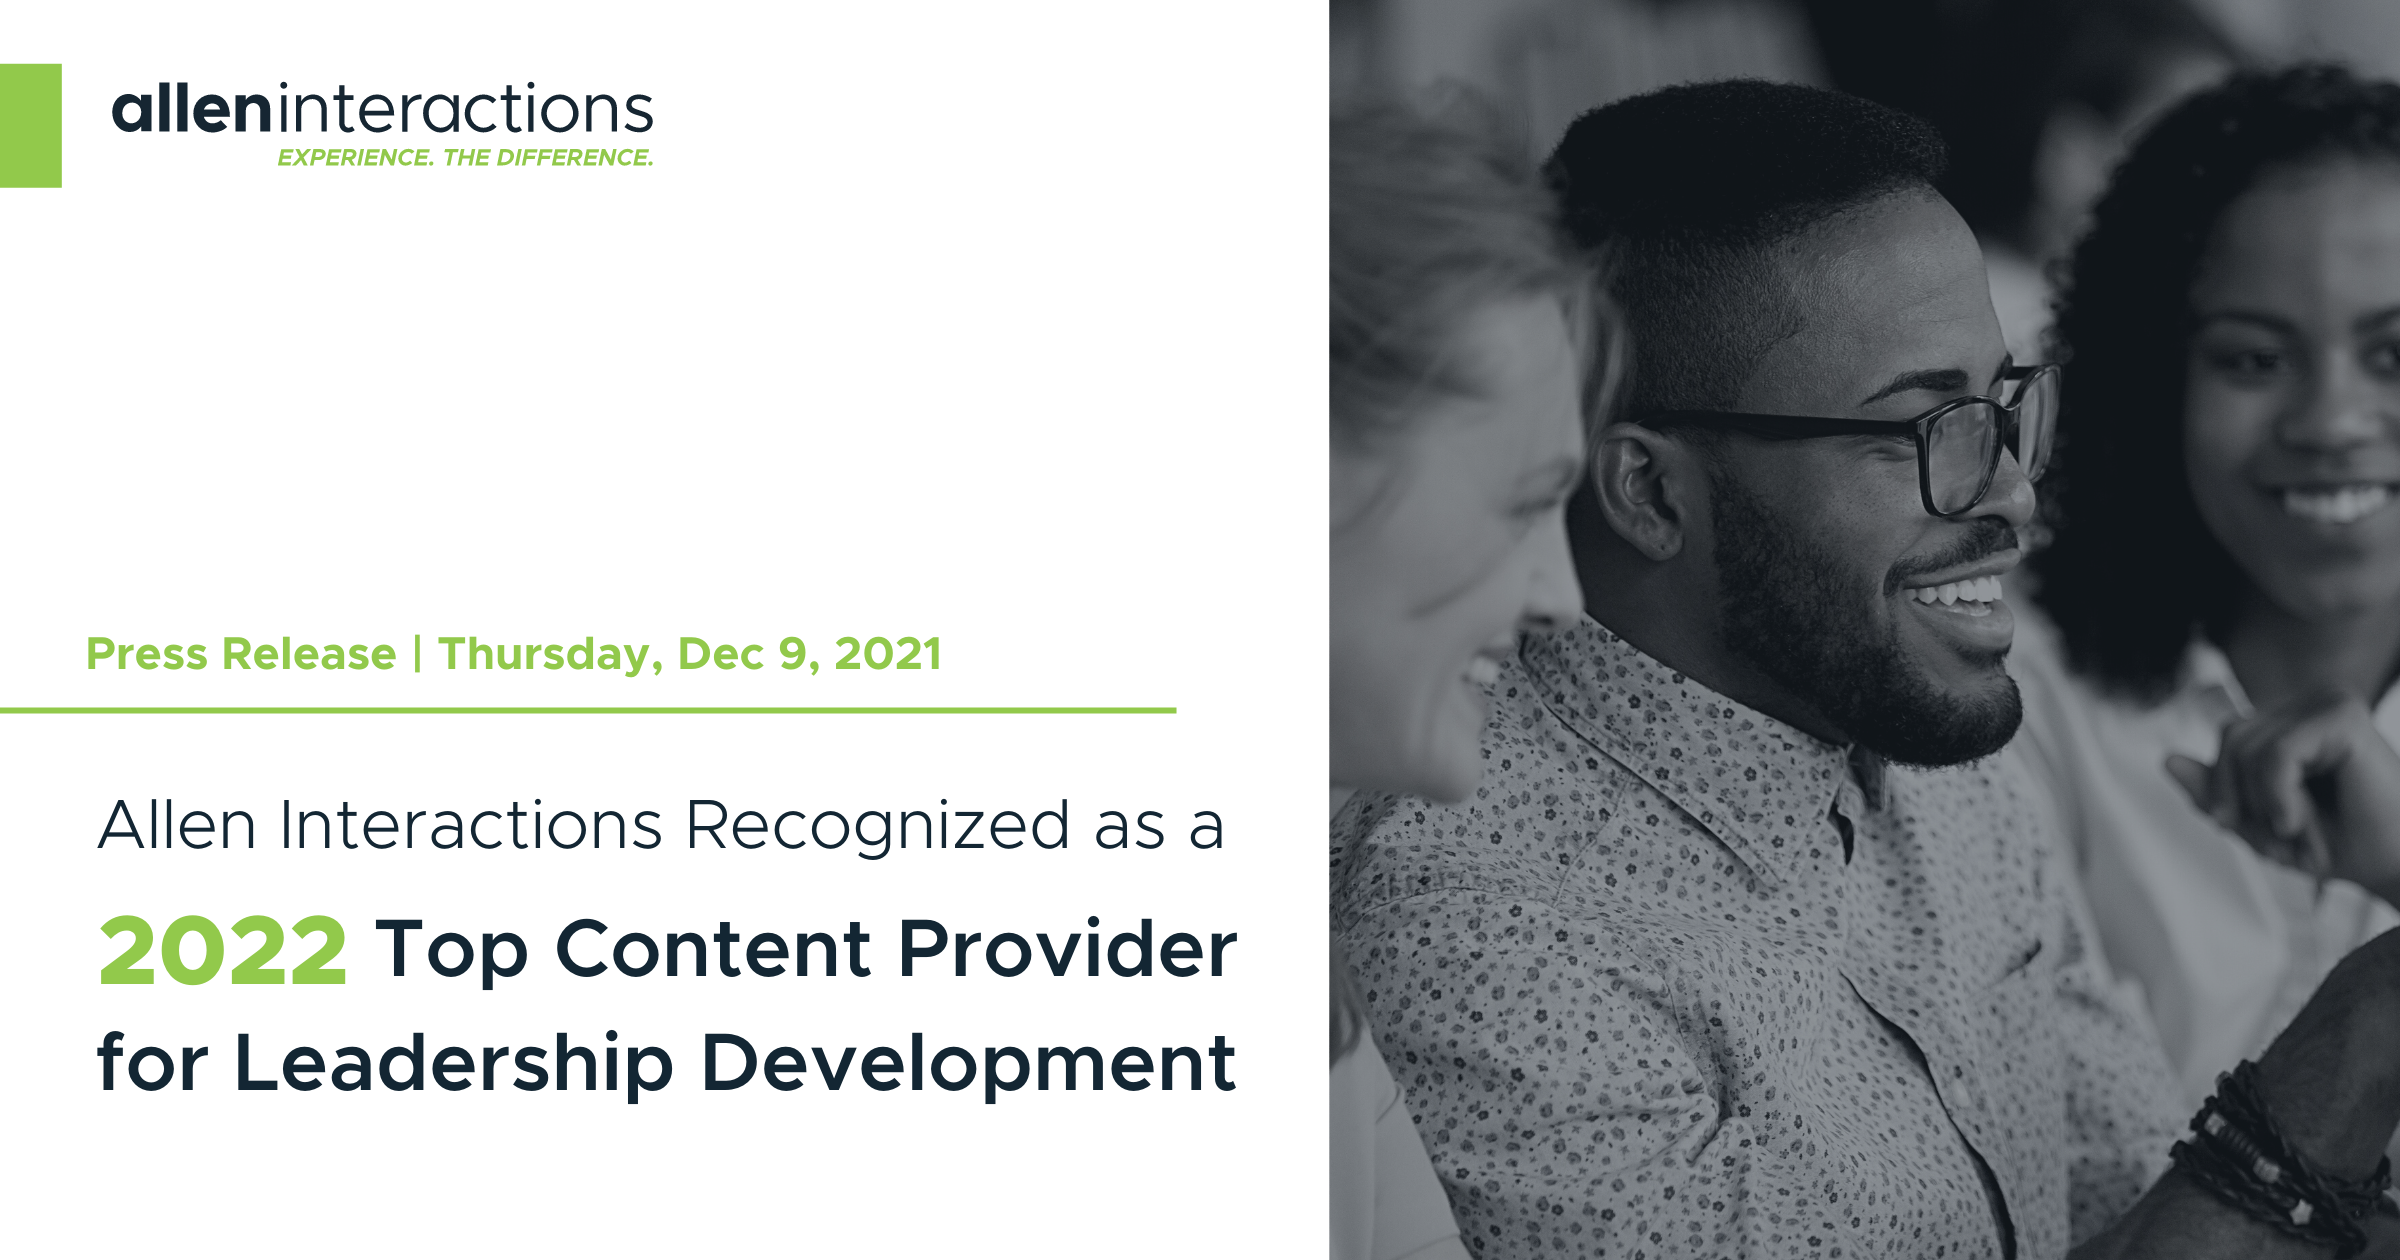 Allen Interactions Recognized by eLearning Industry as a 2022 Top Content Provider for Leadership Development